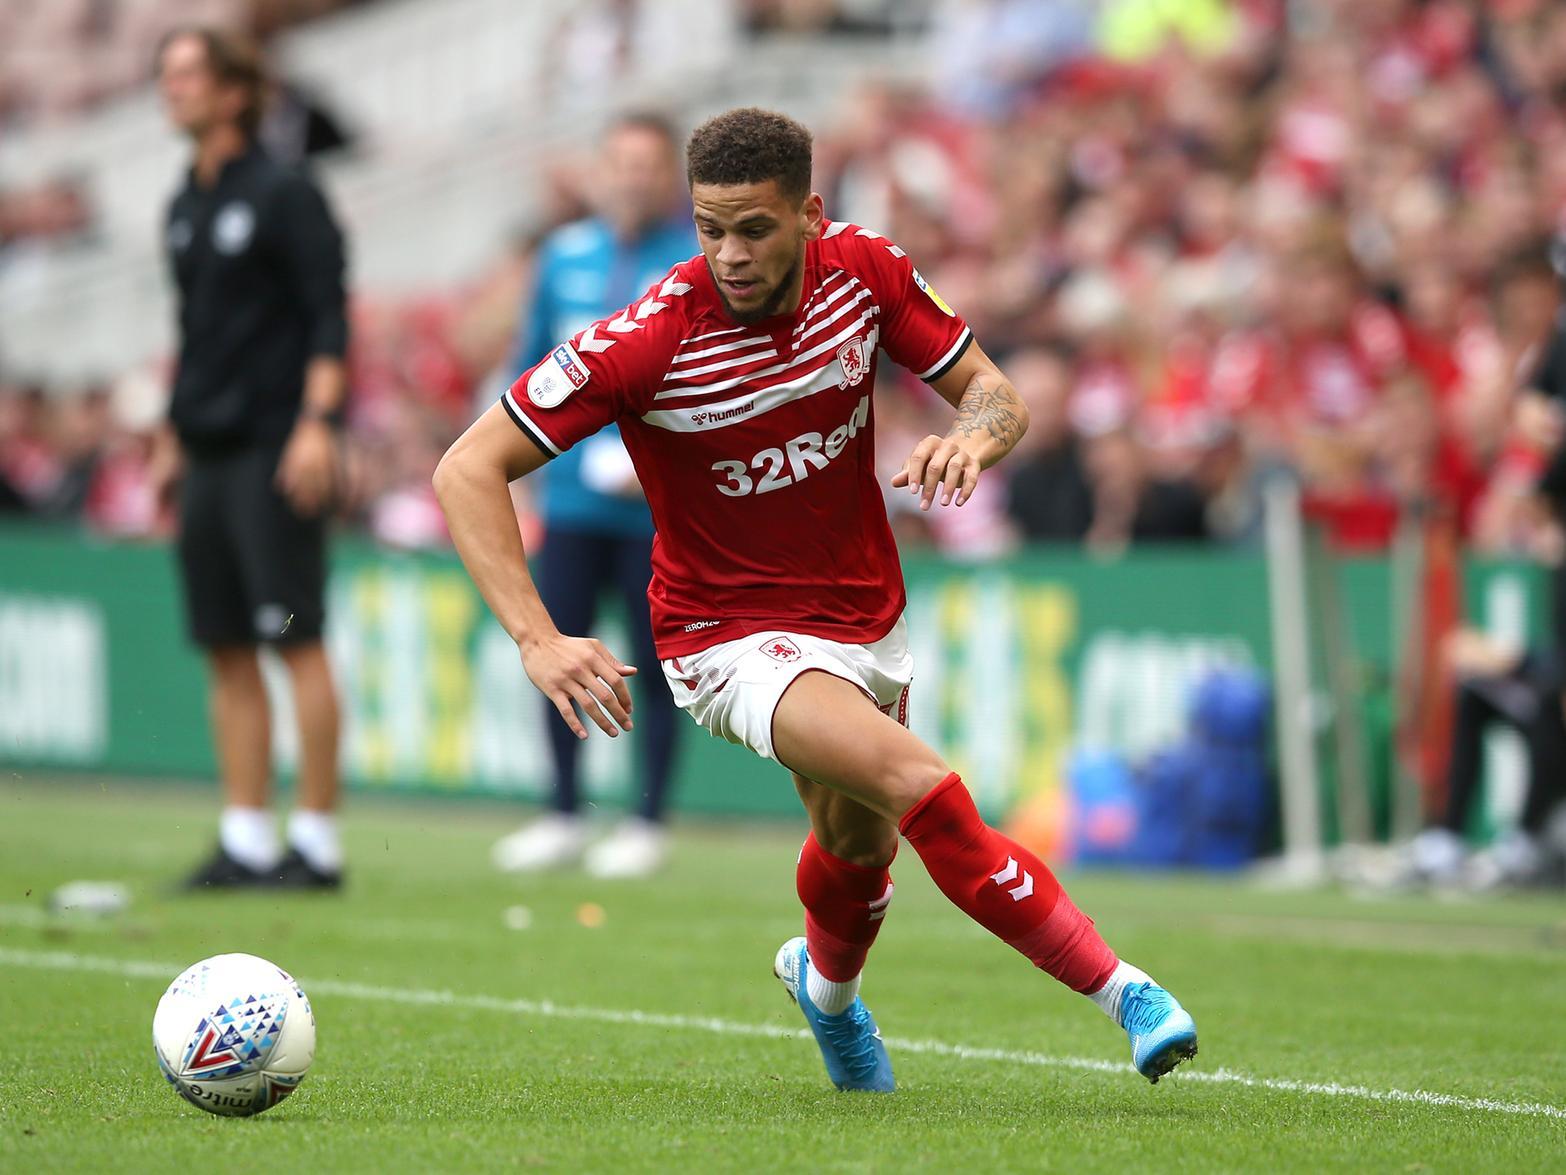 Charlton Athletic may look to bring in Middlesbrough forward Marcus Browne on loan this January, although Doncaster Rovers and Coventry City could rival them for the deal. (Coventry Telegraph)